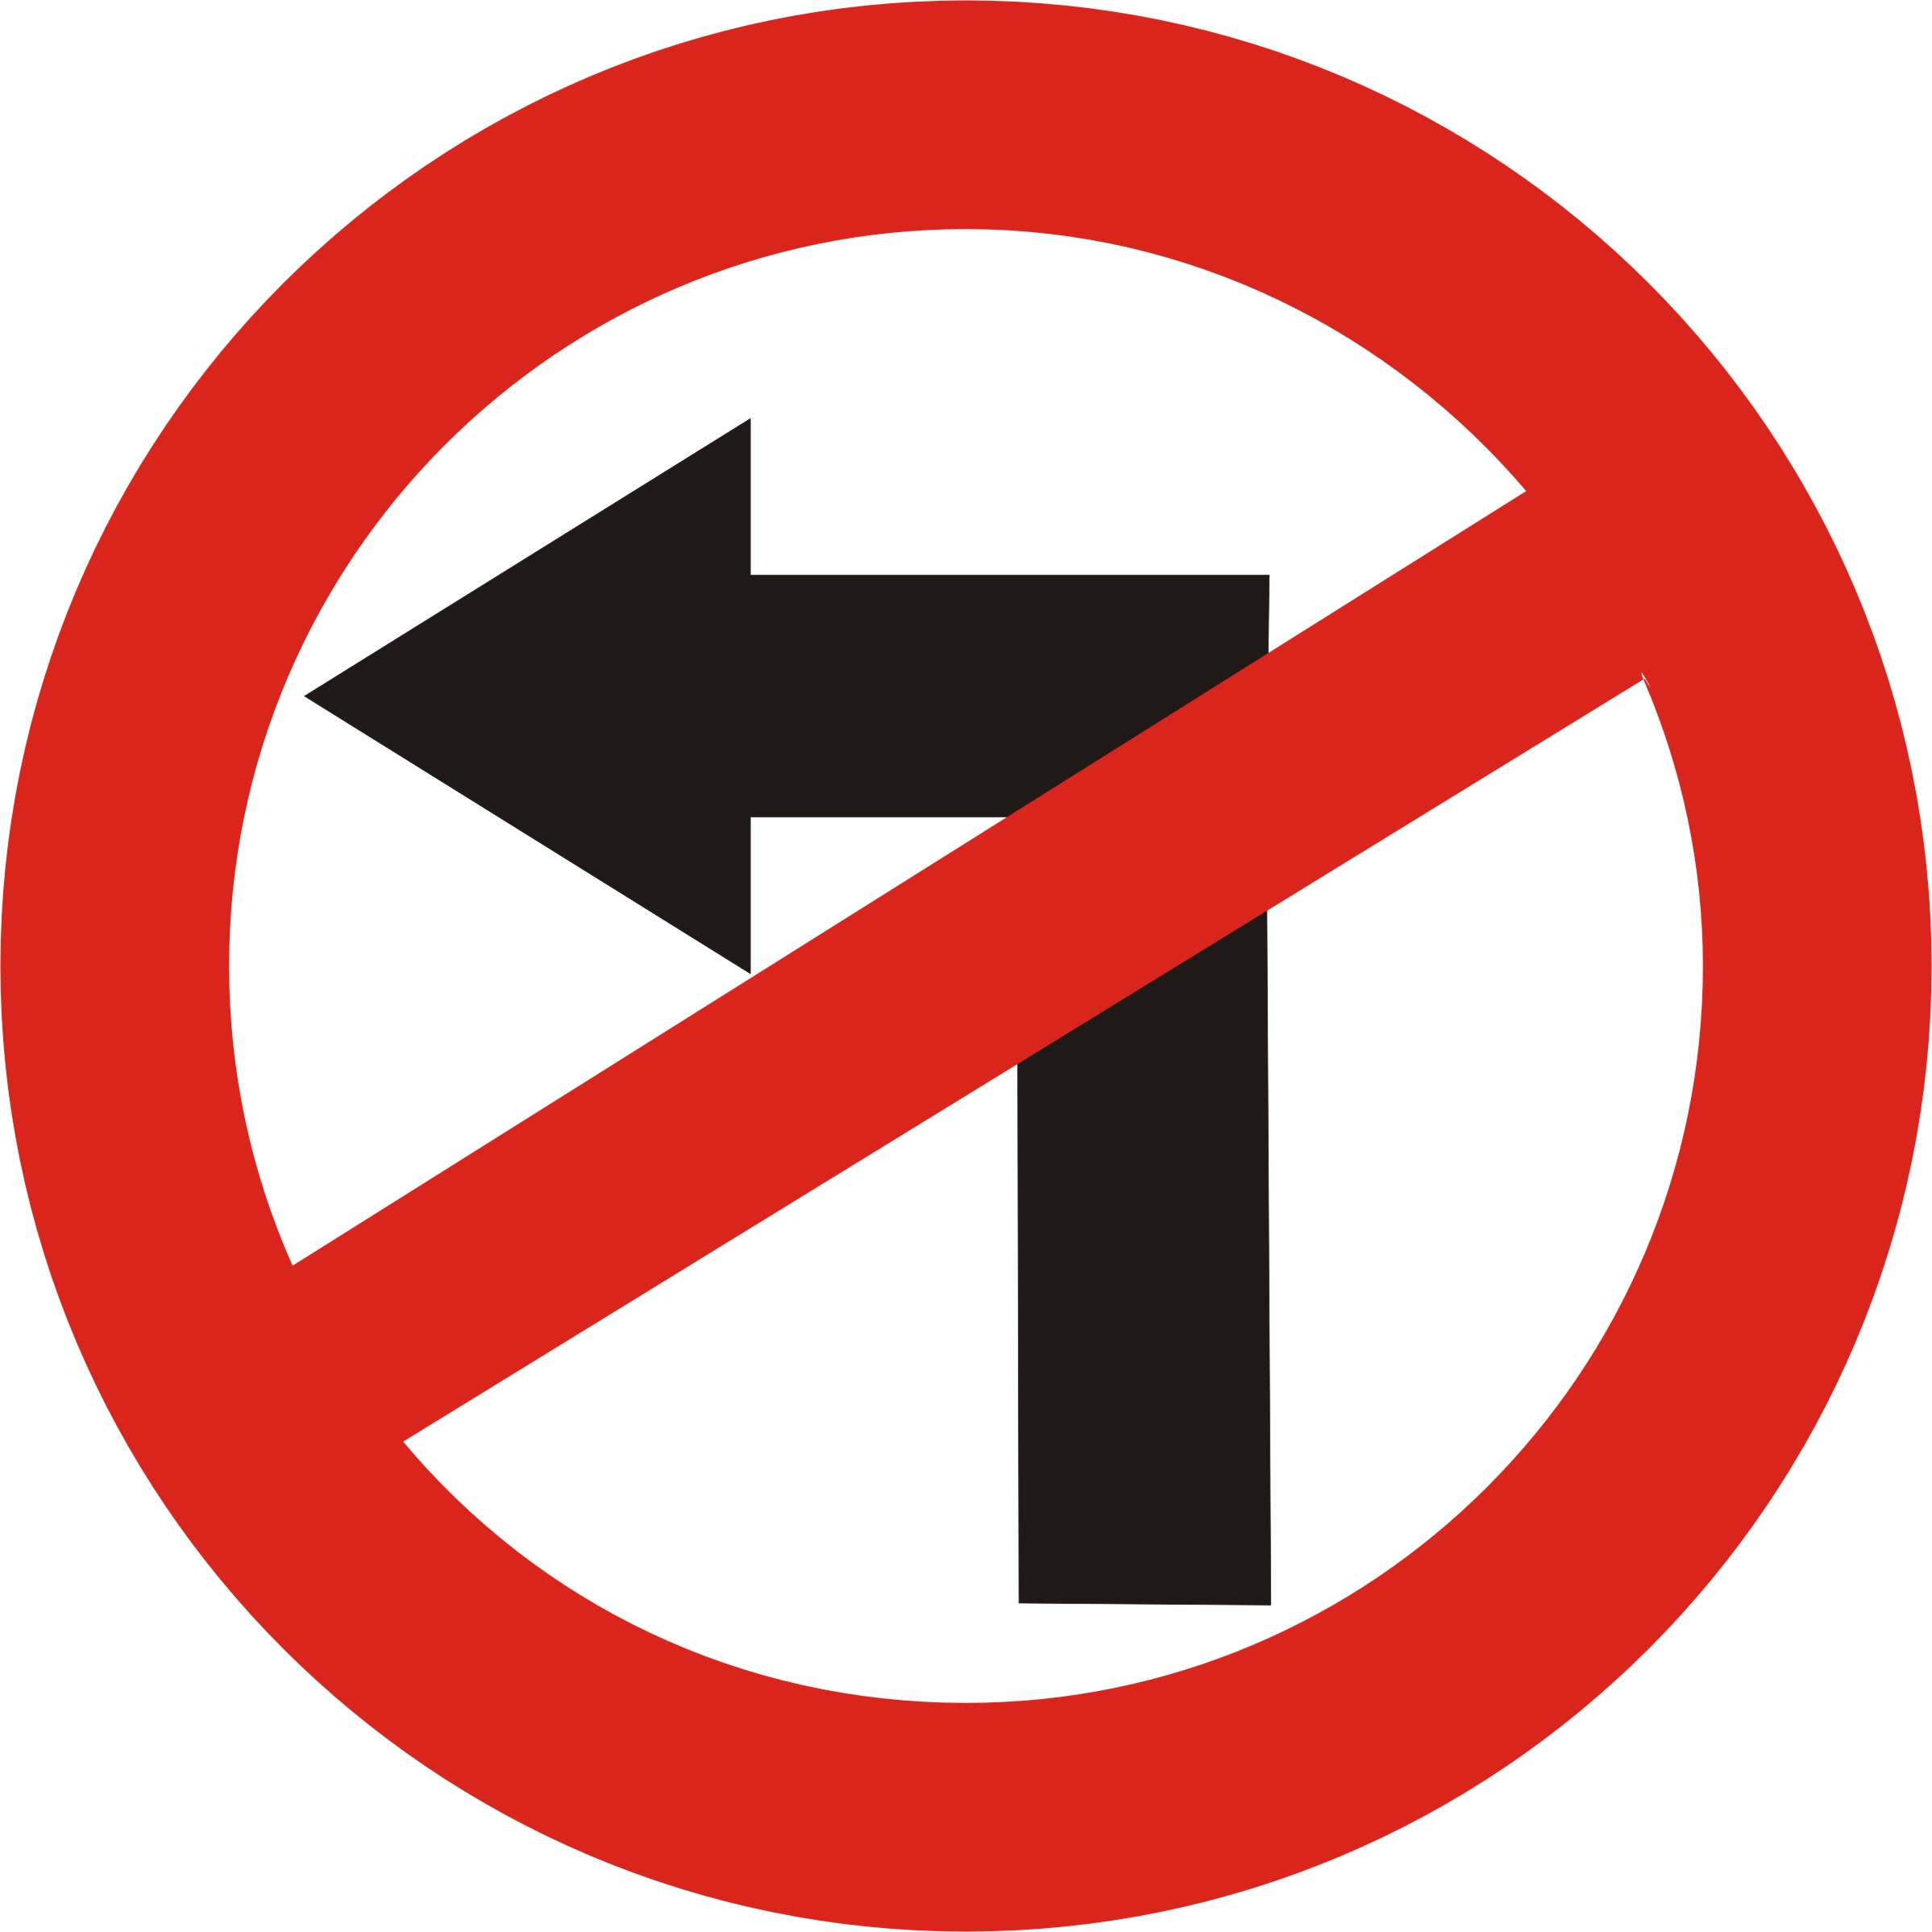 File:Road Sign No Left Turn.jpg - Wikimedia Commons